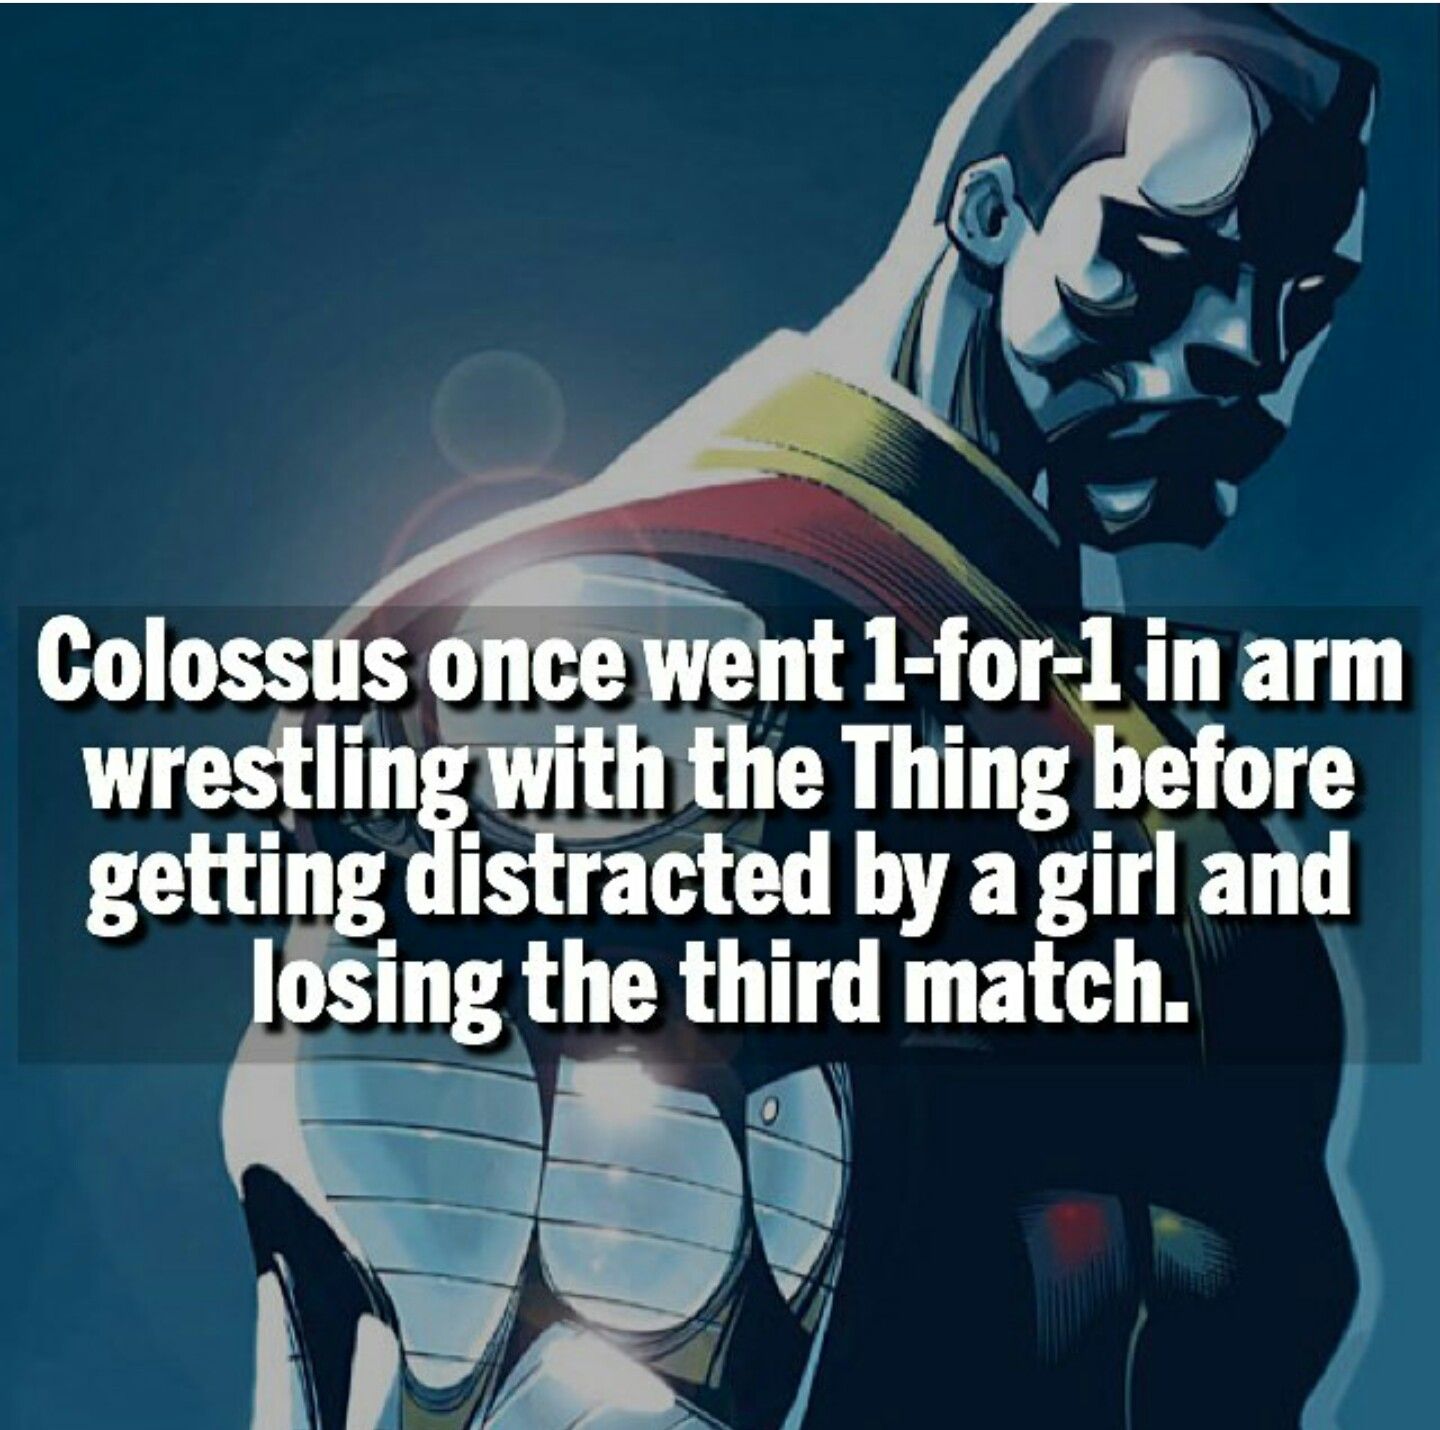 super hero facts - marvel colossus - Colossus once went 1for1 in arm wrestling with the Thing before getting distracted by a girl and losing the third match. 0